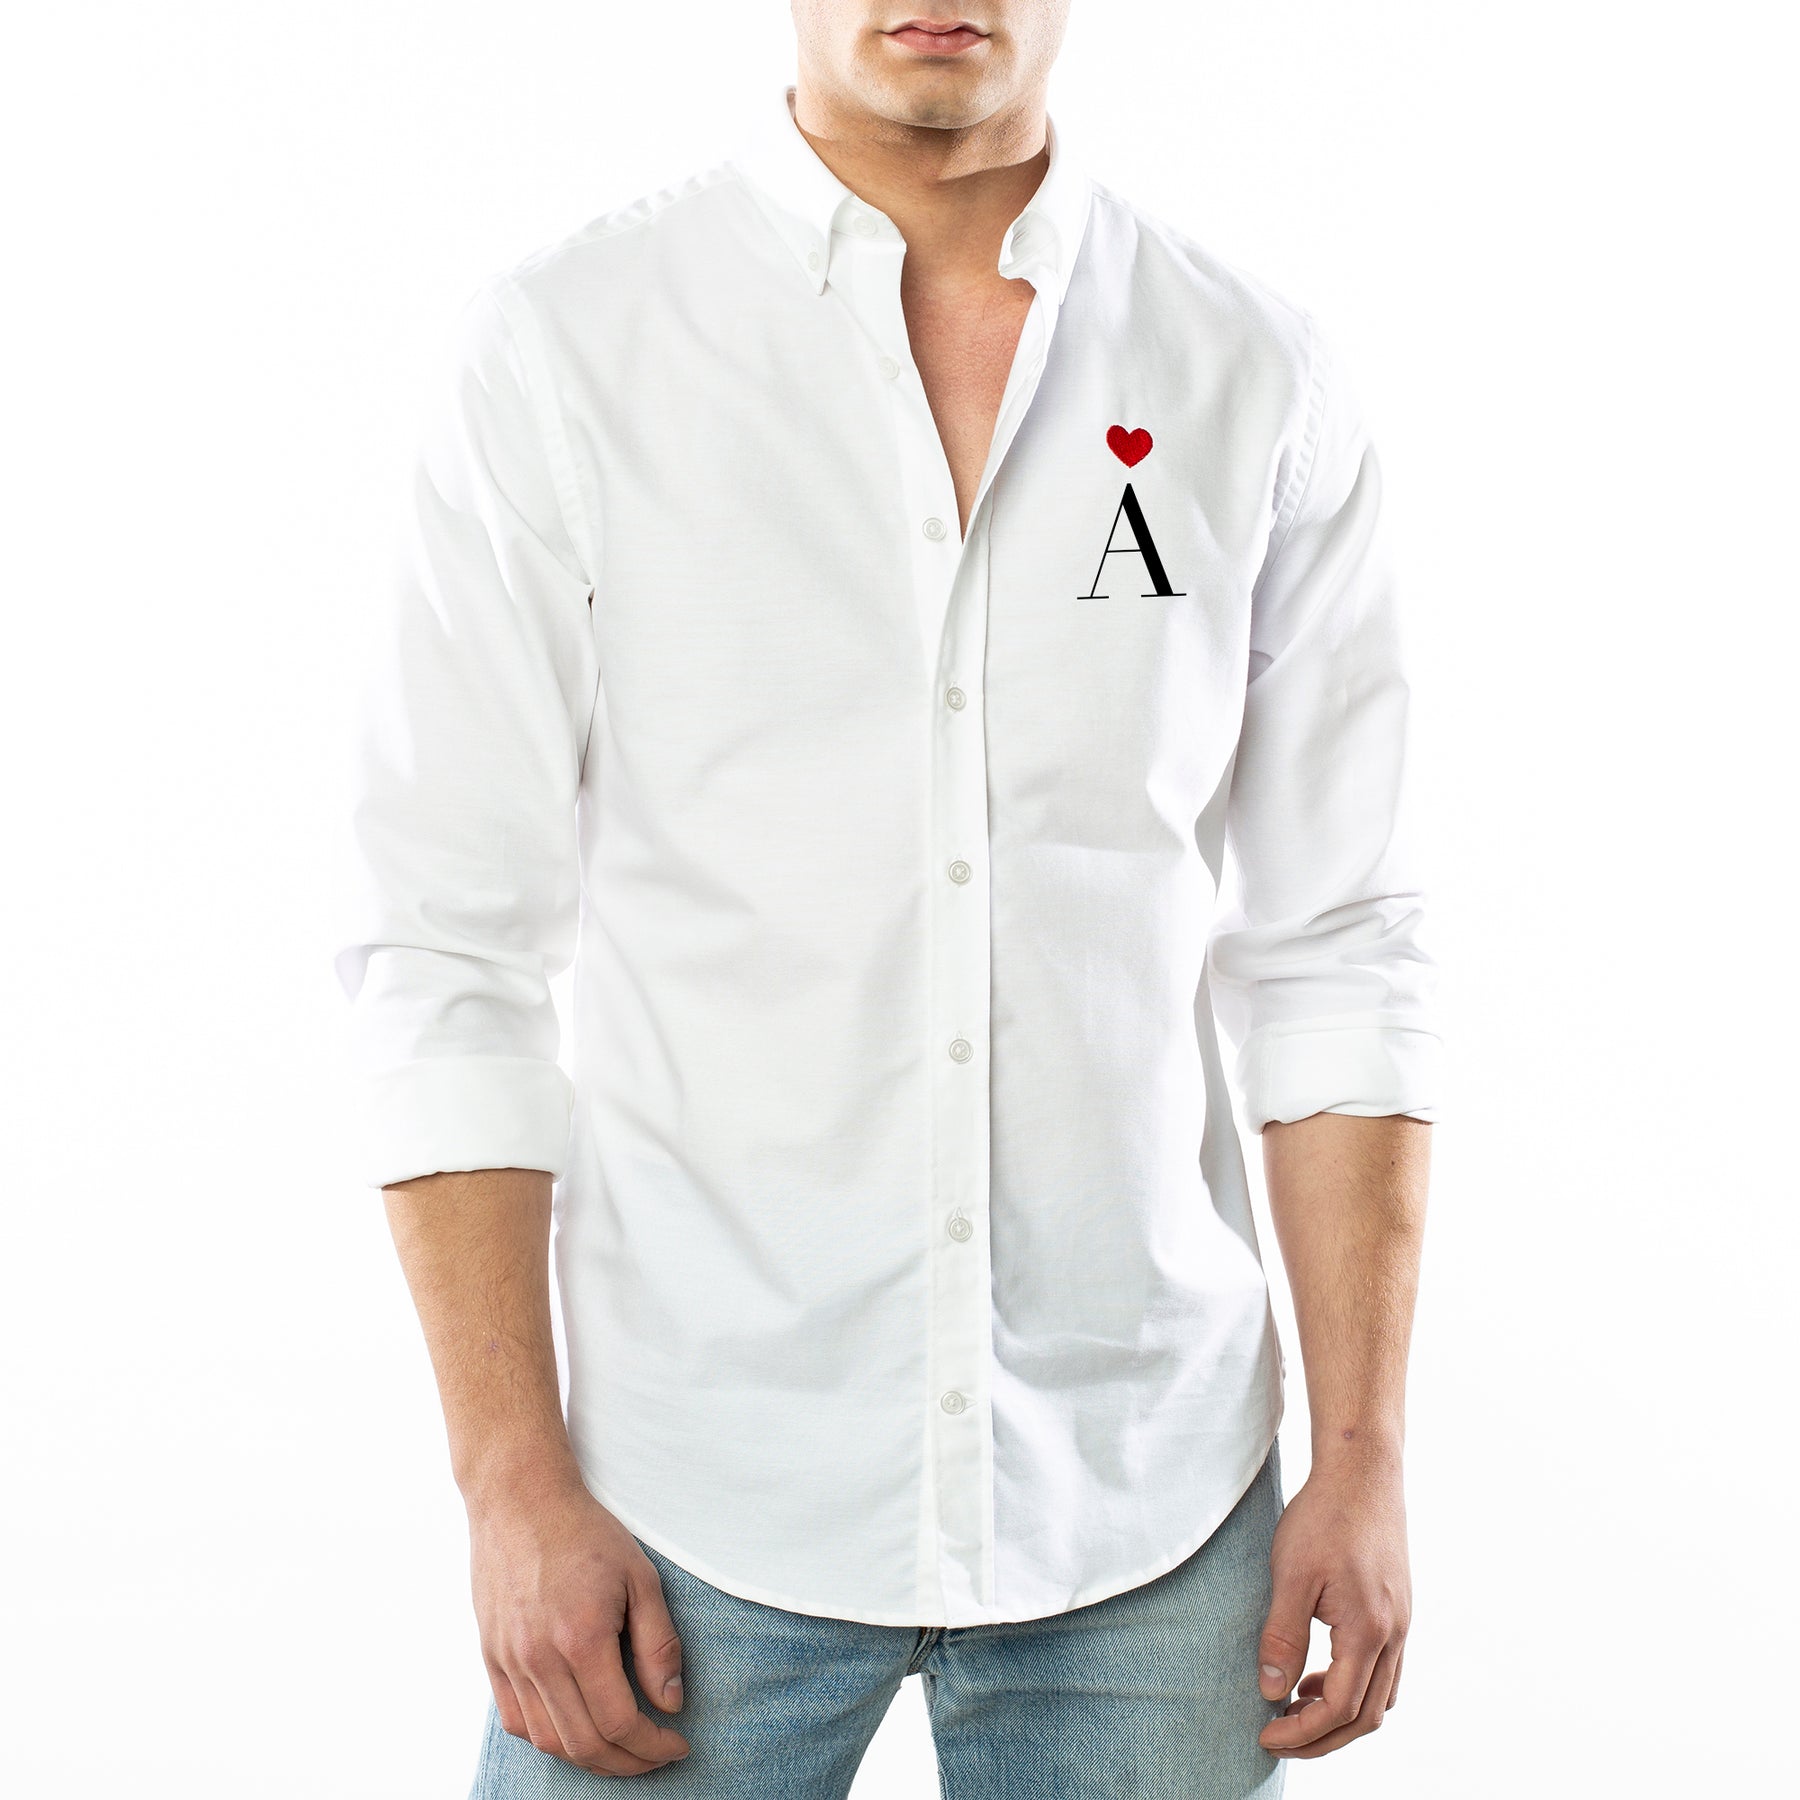 Heart Personalized White Oxford Shirt